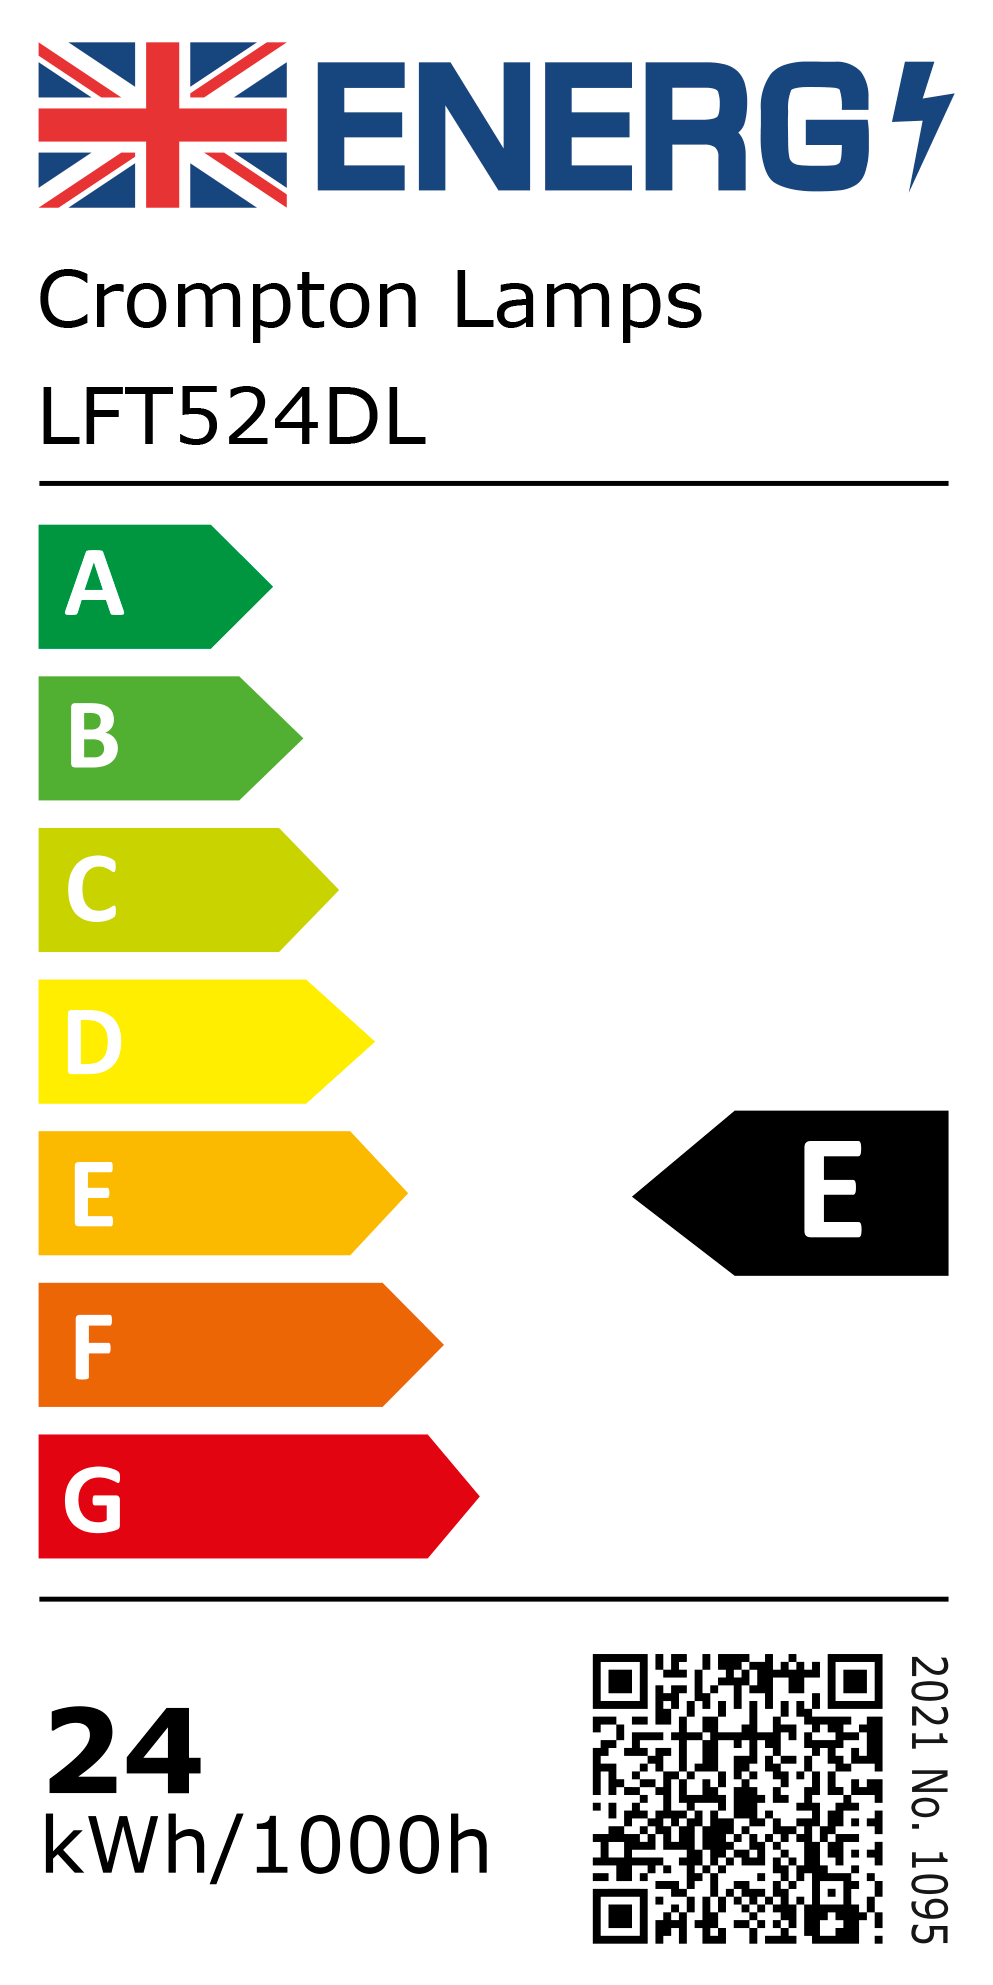 New 2021 Energy Rating Label: Stock Code LFT524DL